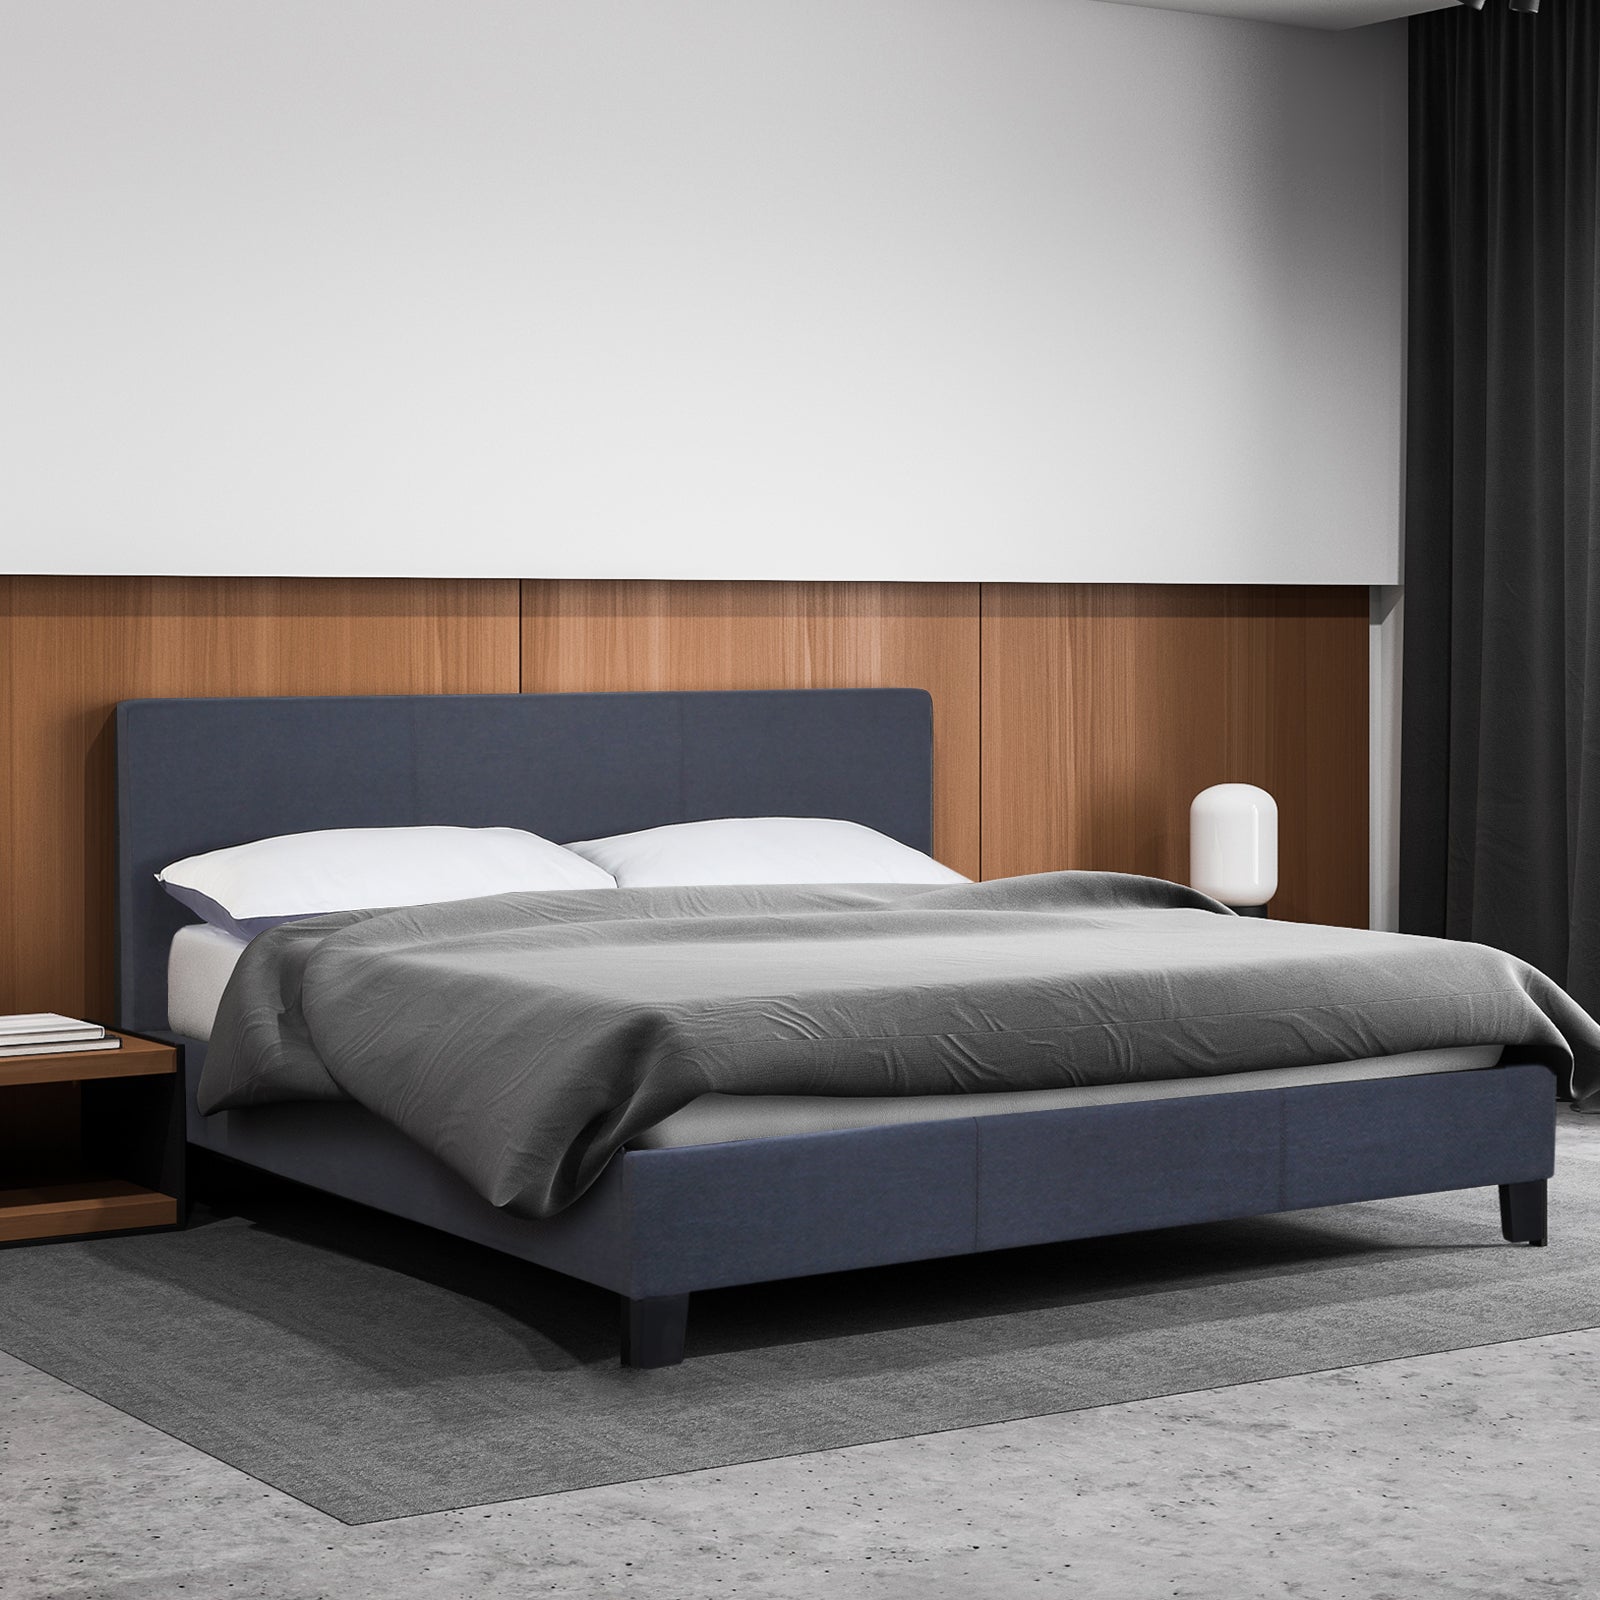 Milano Sienna Luxury Bed with Headboard (Model 2) - Charcoal No.35 - King